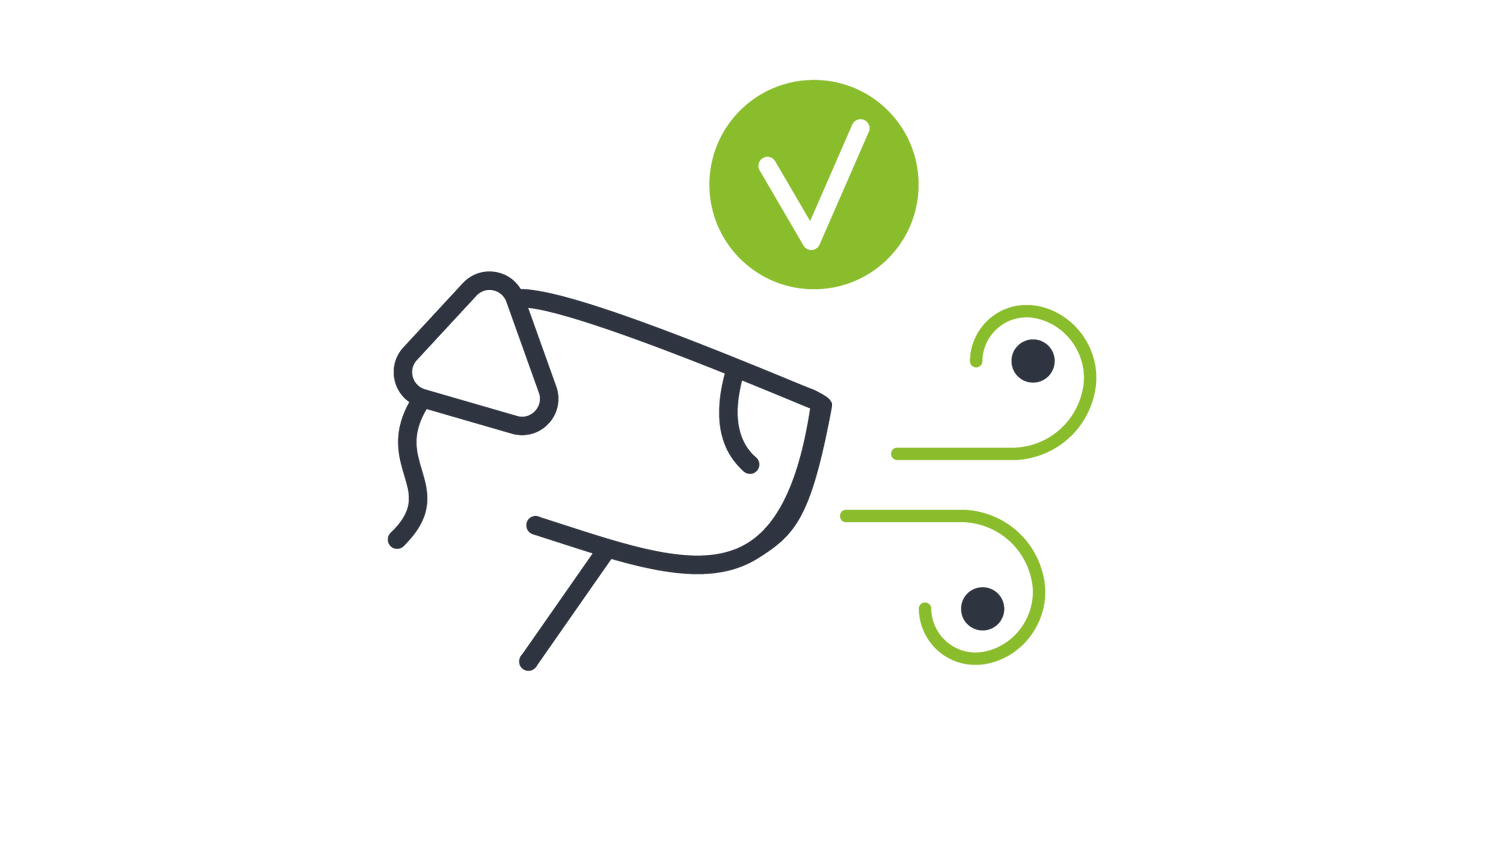 Icon of a dogs face with two abstract, curved lines representing breath and a green checkmark inside a circle